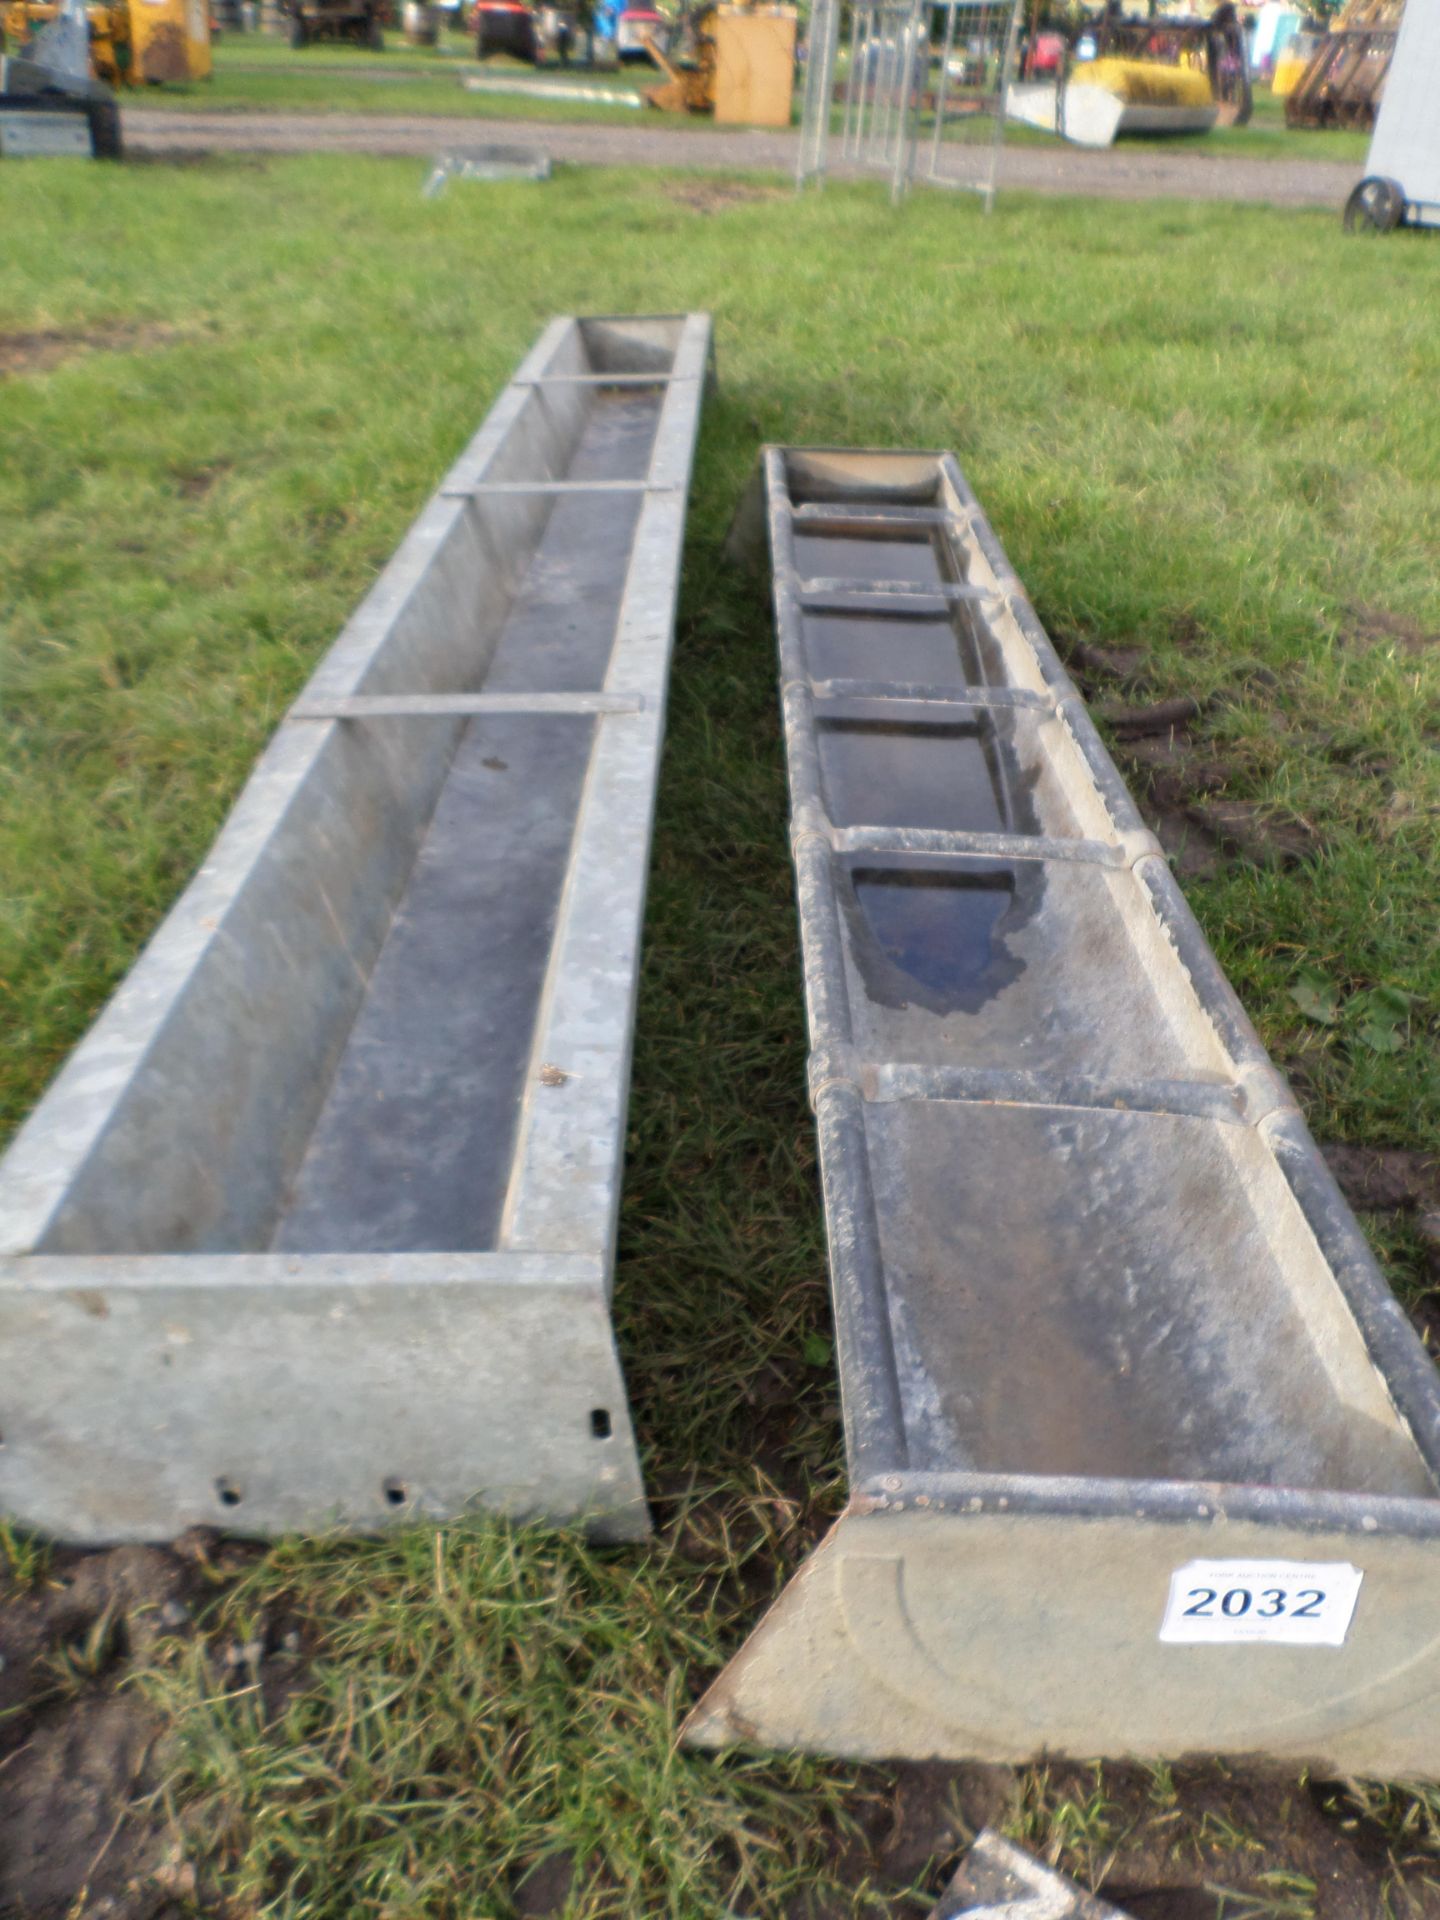 2 galvanised sheep troughs - Image 4 of 4